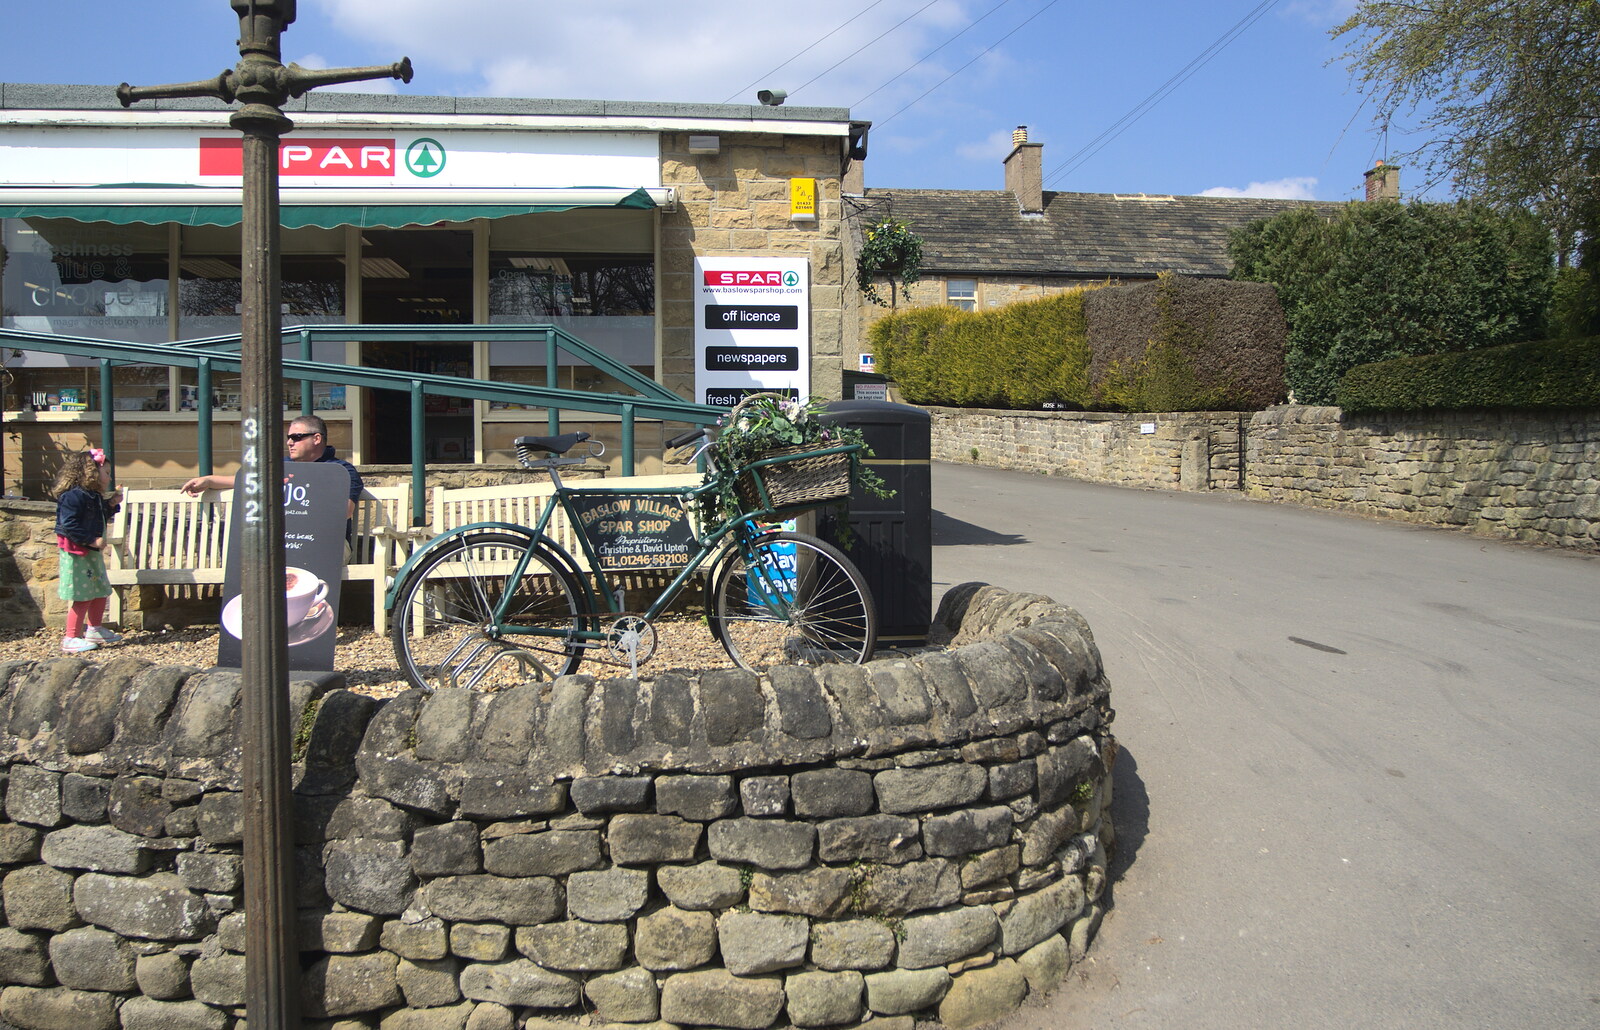 The Baslow Village Shop from Chesterfield and the Twisty Spire, Derbyshire - 19th April 2013